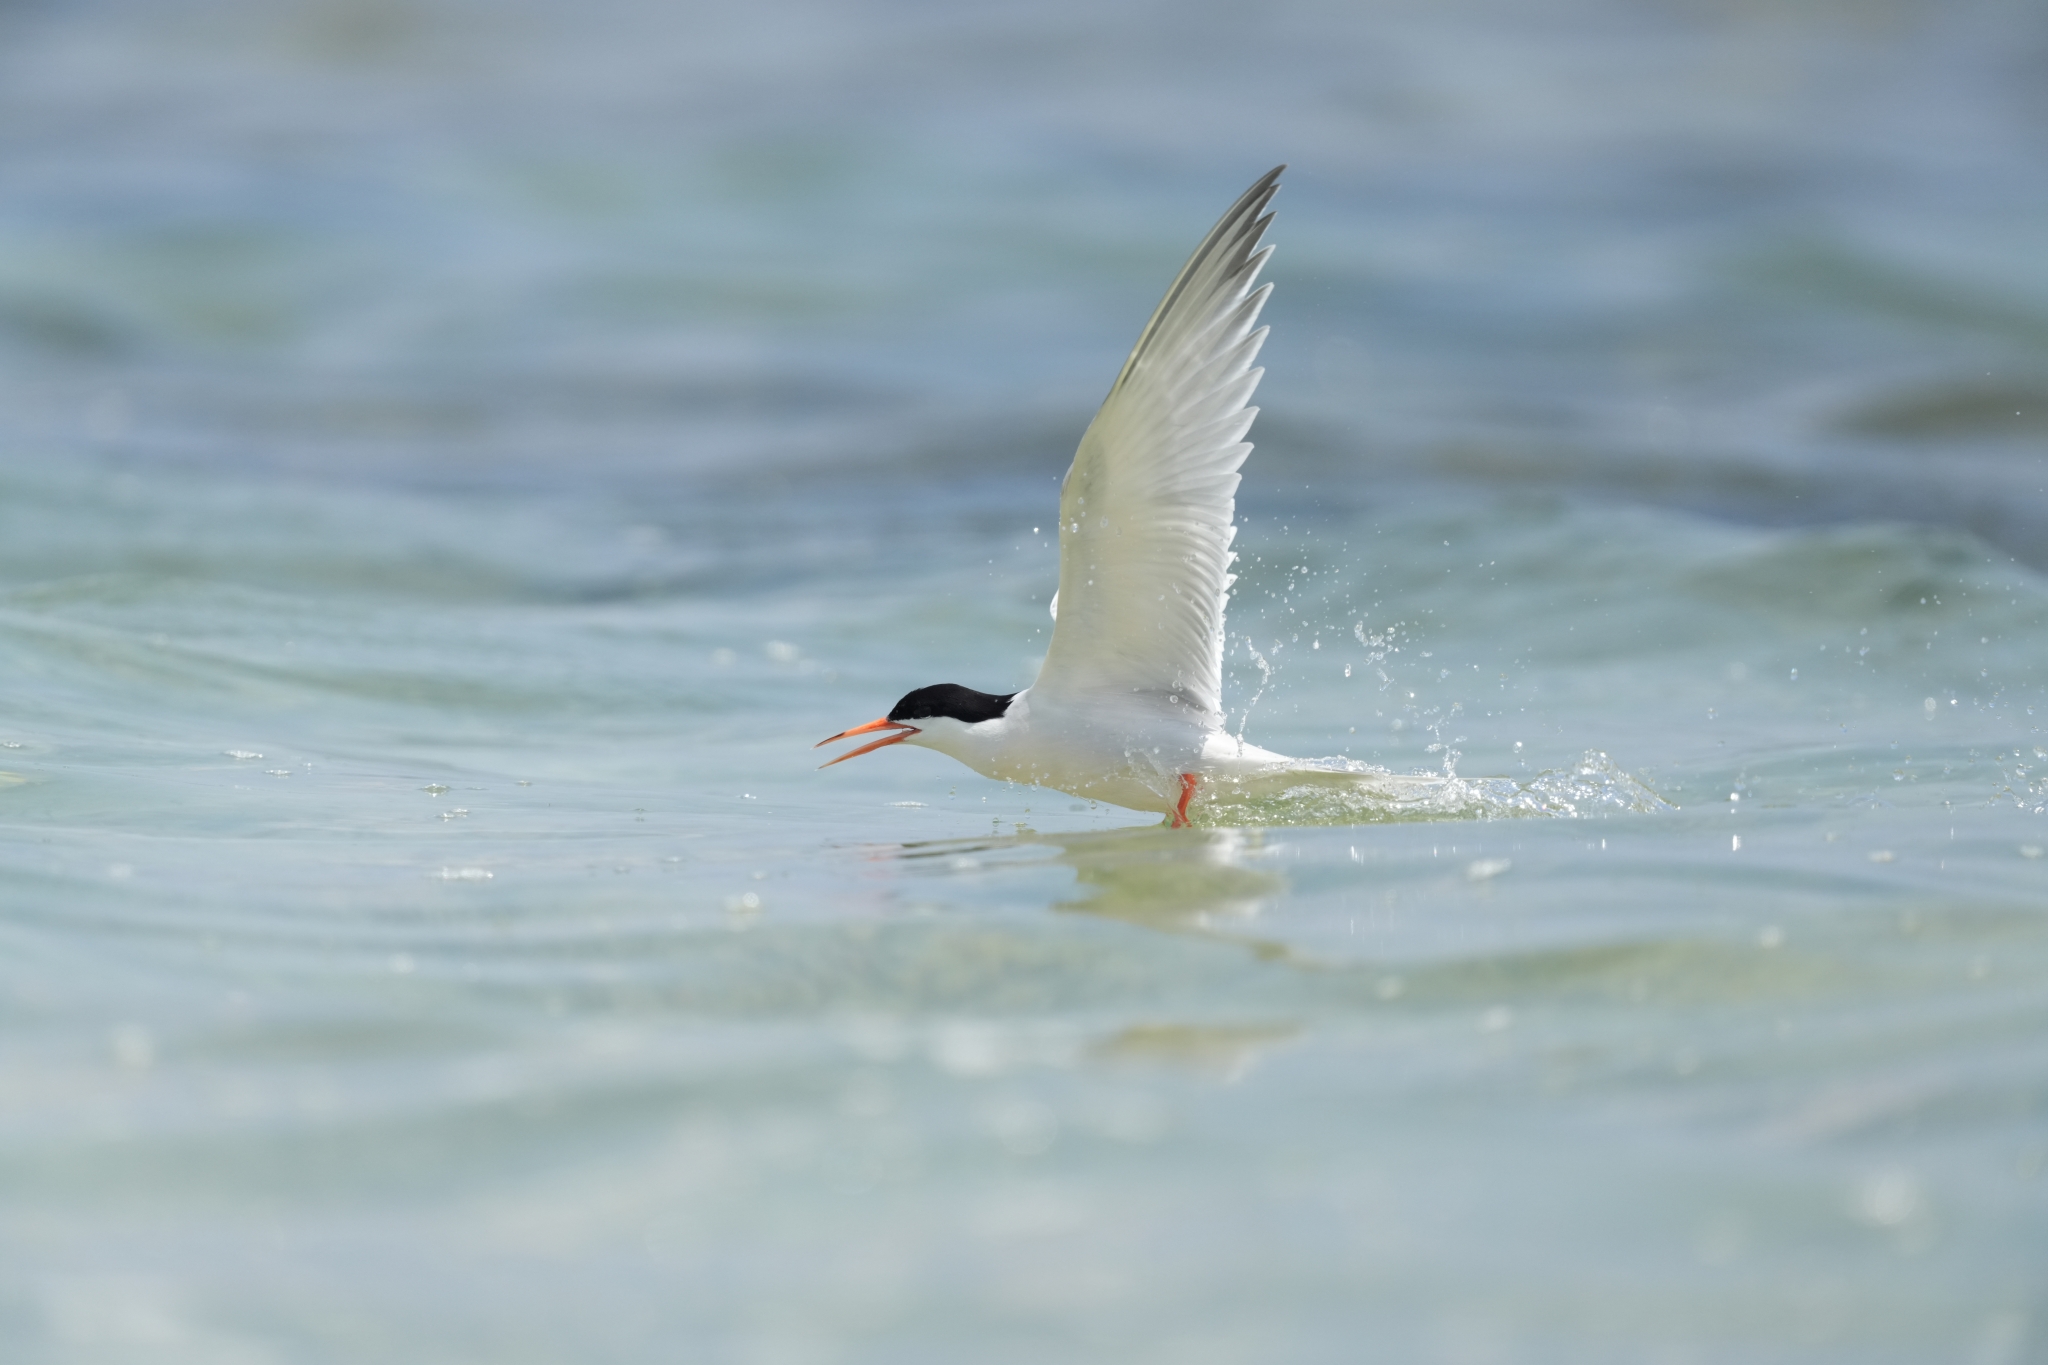 A white bird skimming the ocean as if hunting for fish